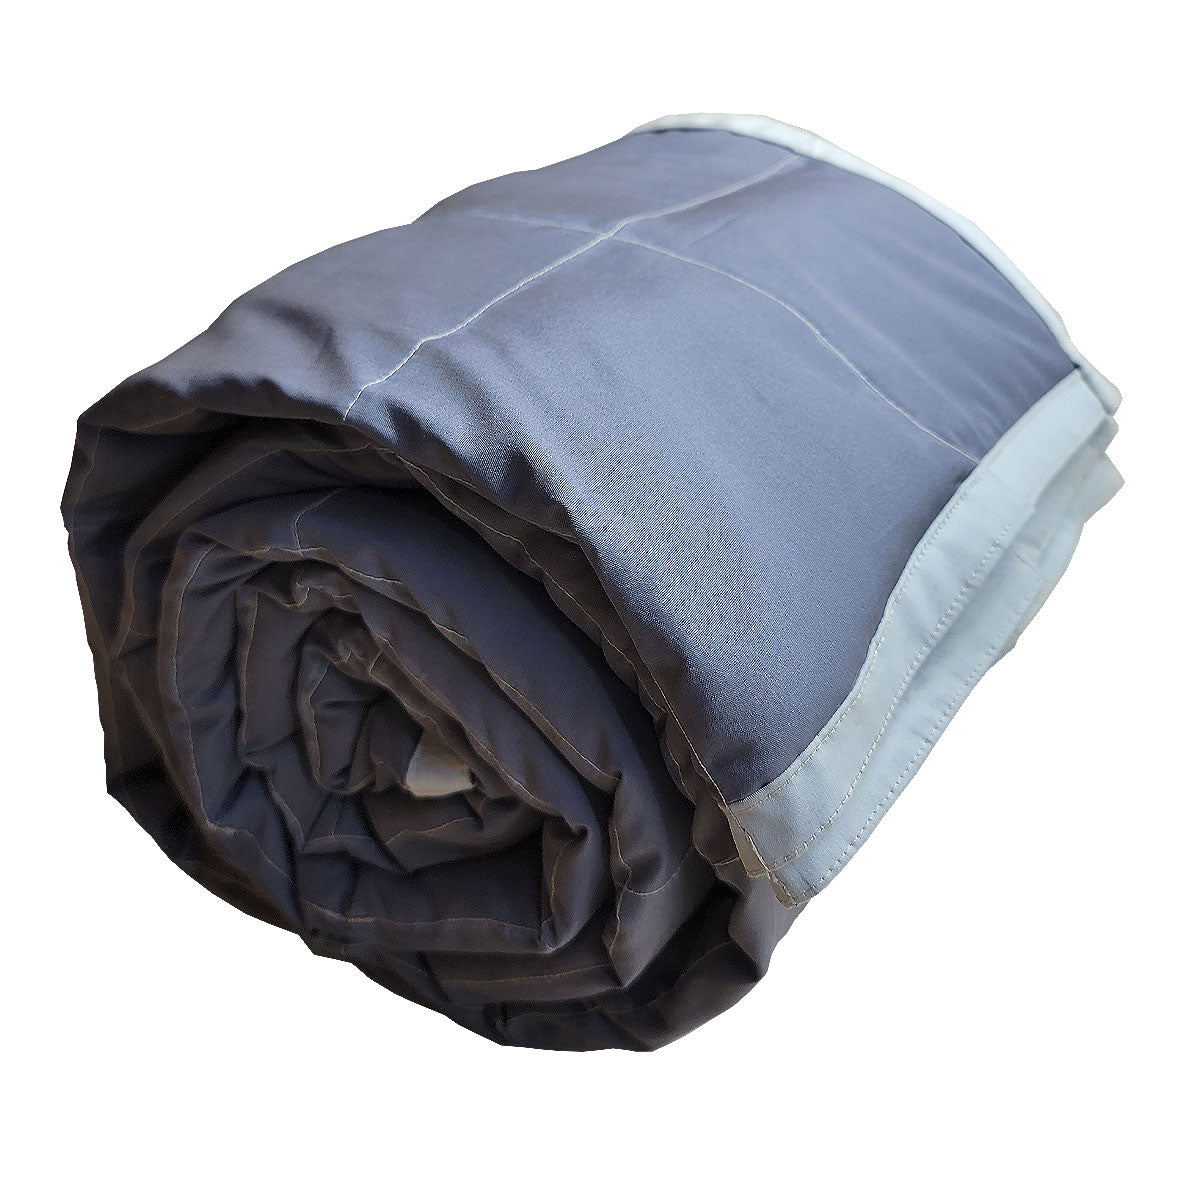 SuperCool Weighted Blanket